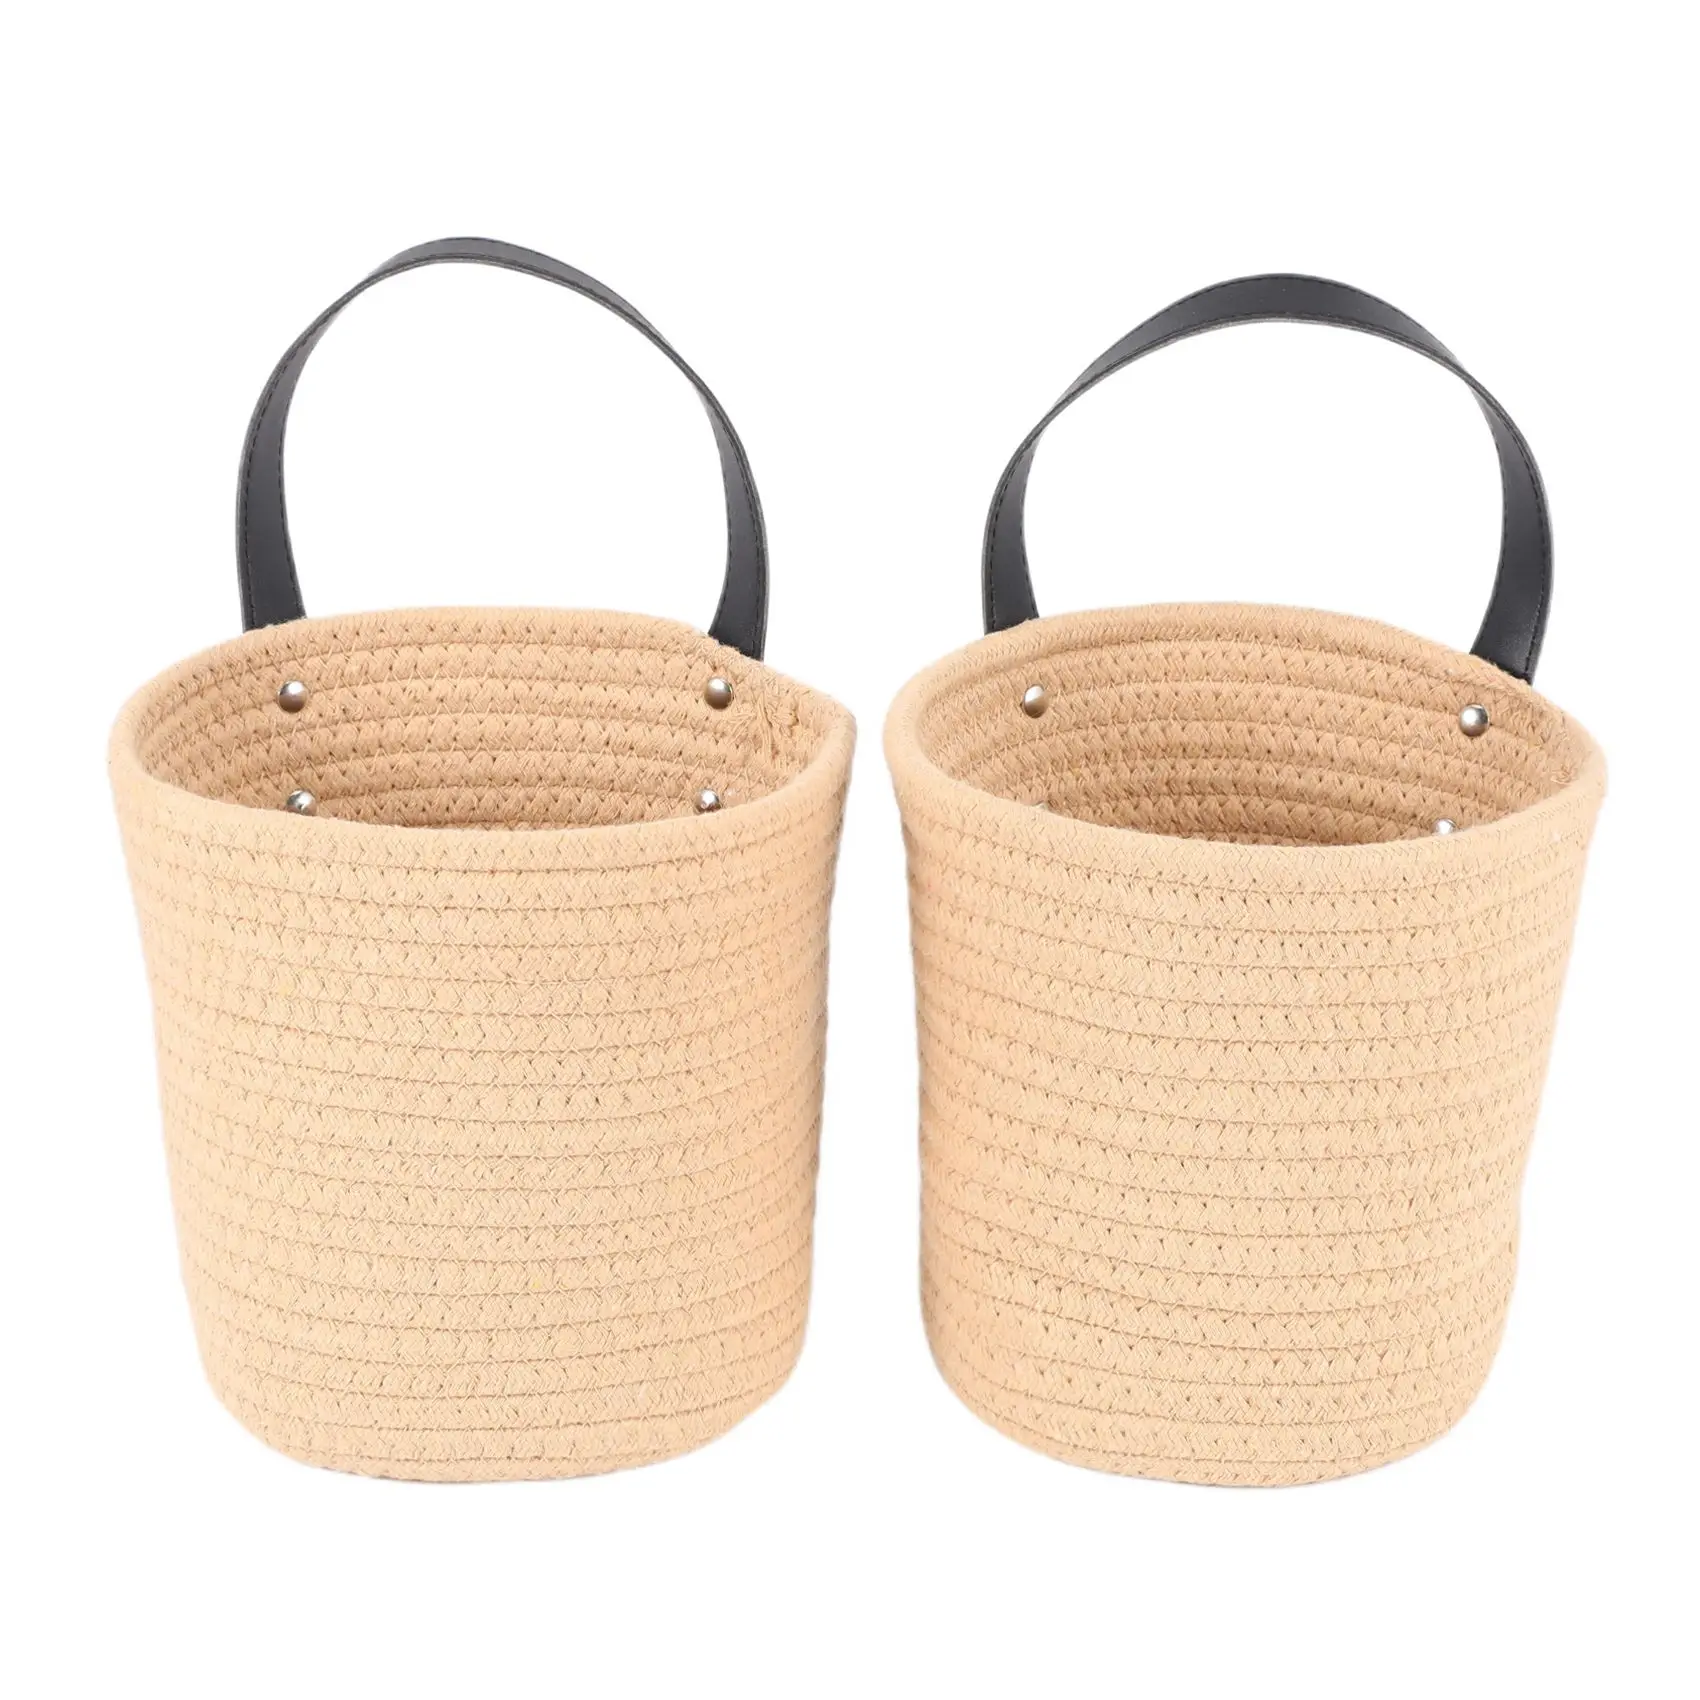 

2 Pack Jute Hanging Basket - 7.87 x 7 Inch Small Woven Fern Hanging Basket Flower Plants, Jute Woven Basket